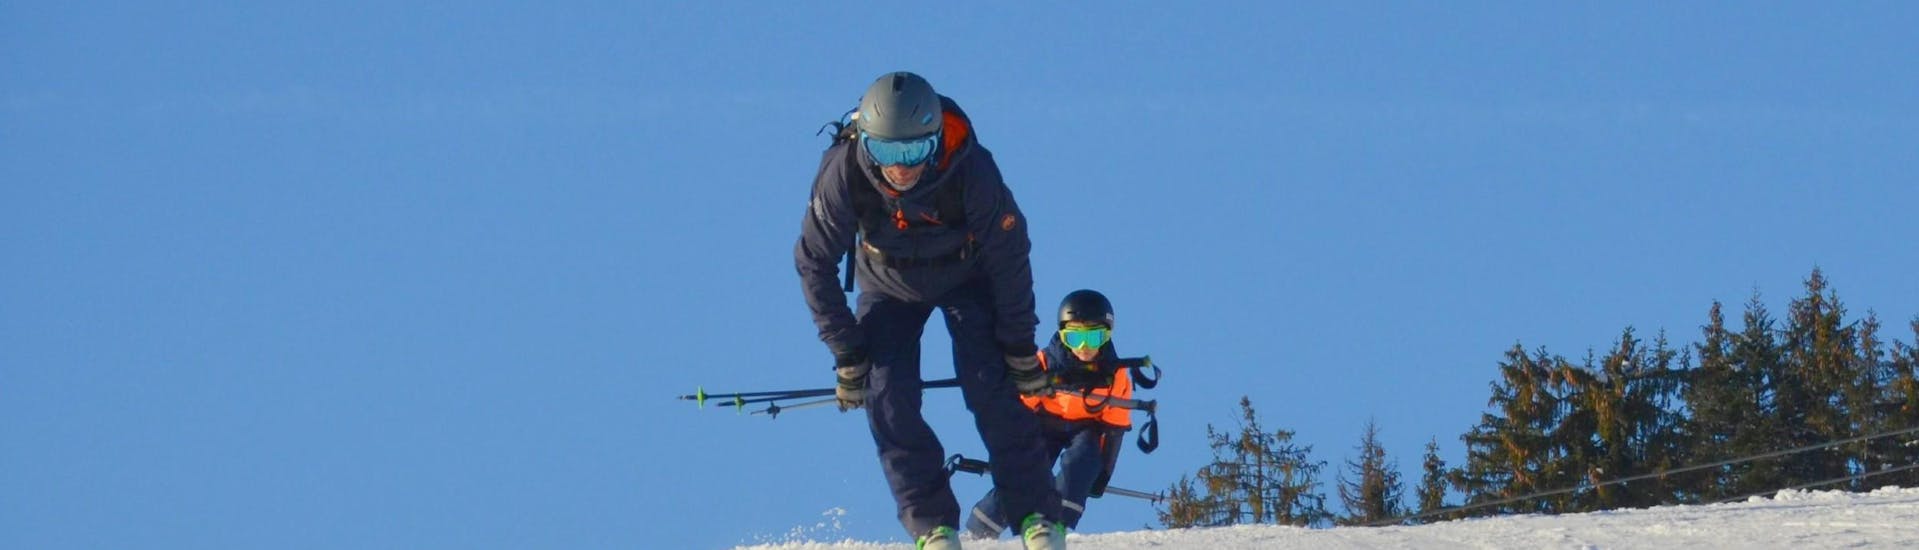 Private Ski Lessons for Kids of All Ages from Ski Sports School Mountainmind Söll.